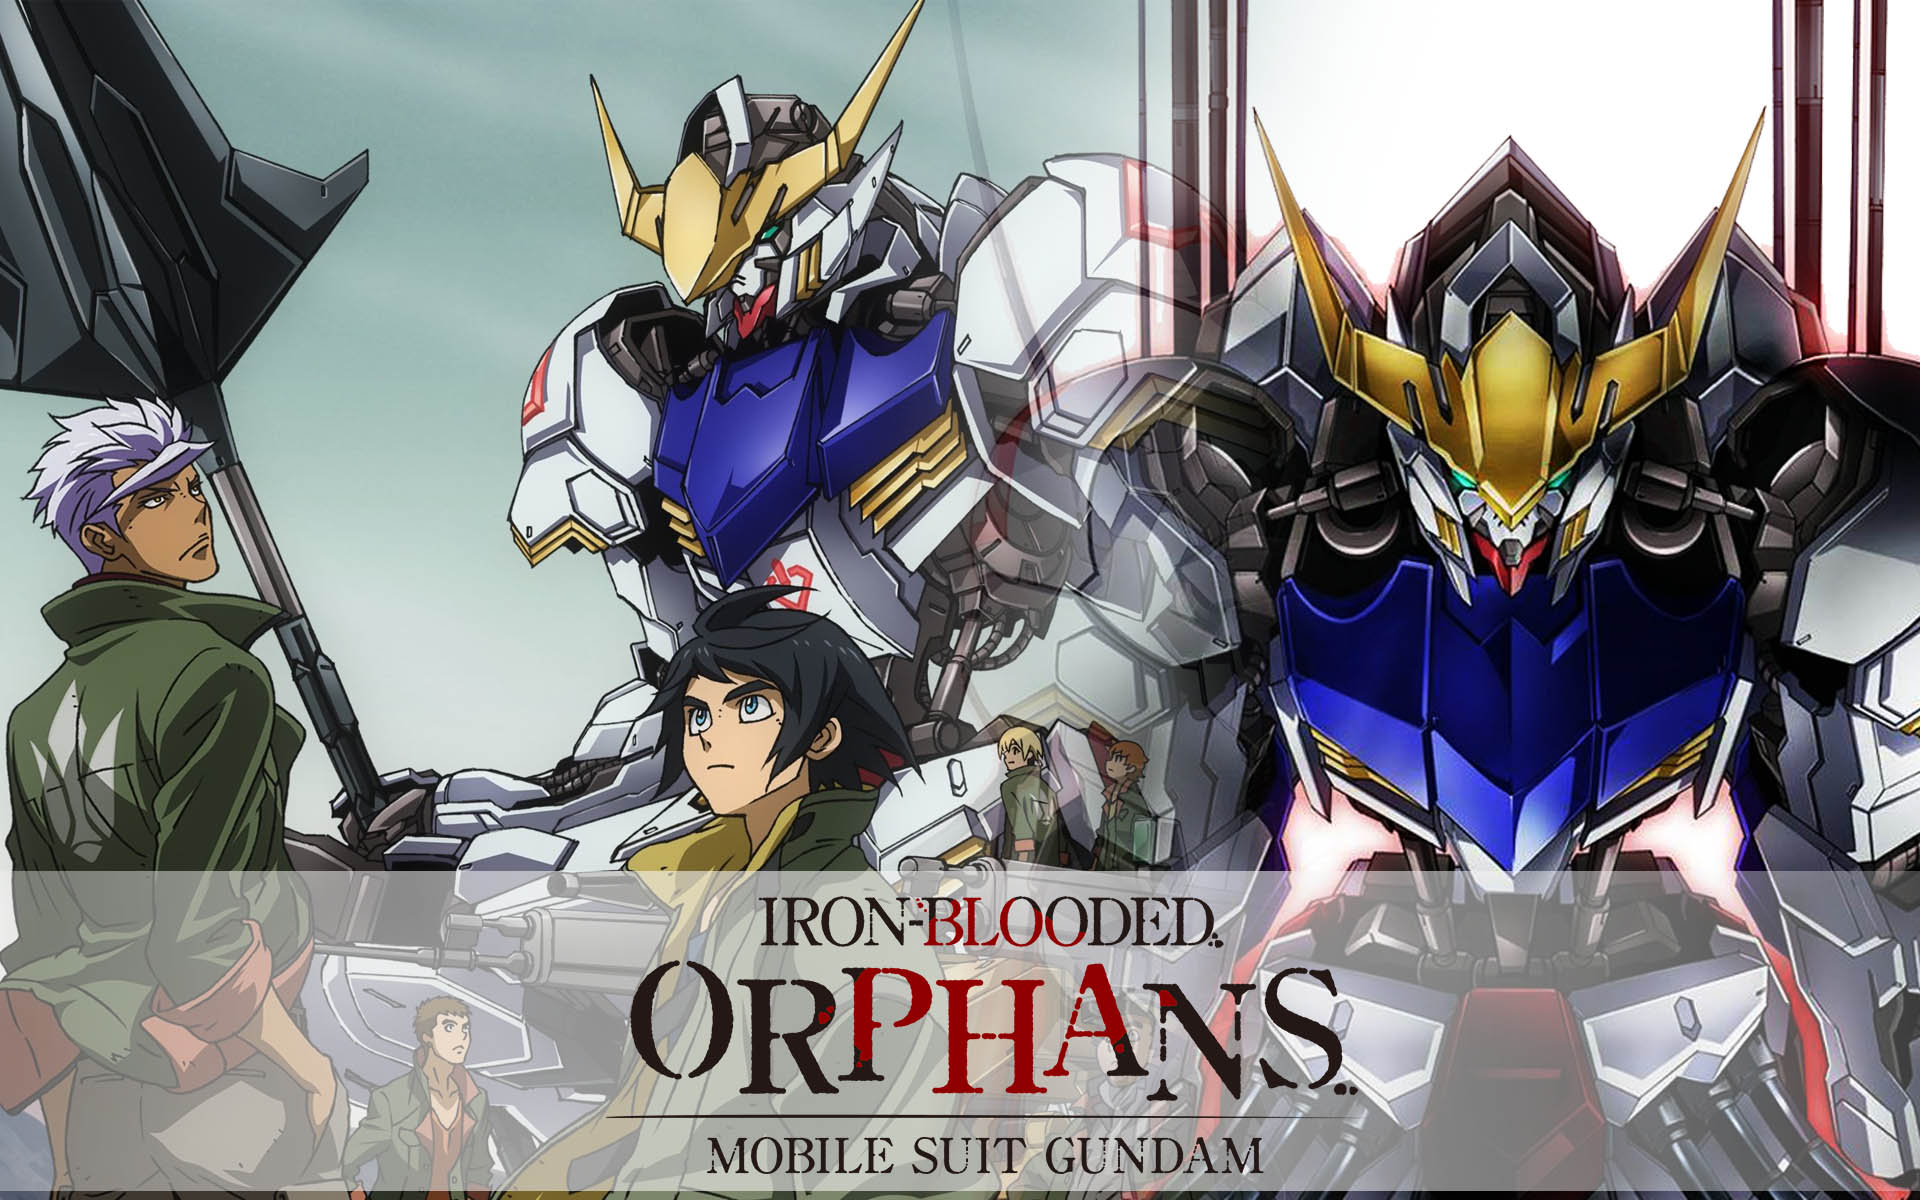 Mobile Suit Gundam Iron Blooded Orphans Wallpapers Anime Hq Mobile Suit Gundam Iron Blooded Orphans Pictures 4k Wallpapers 19